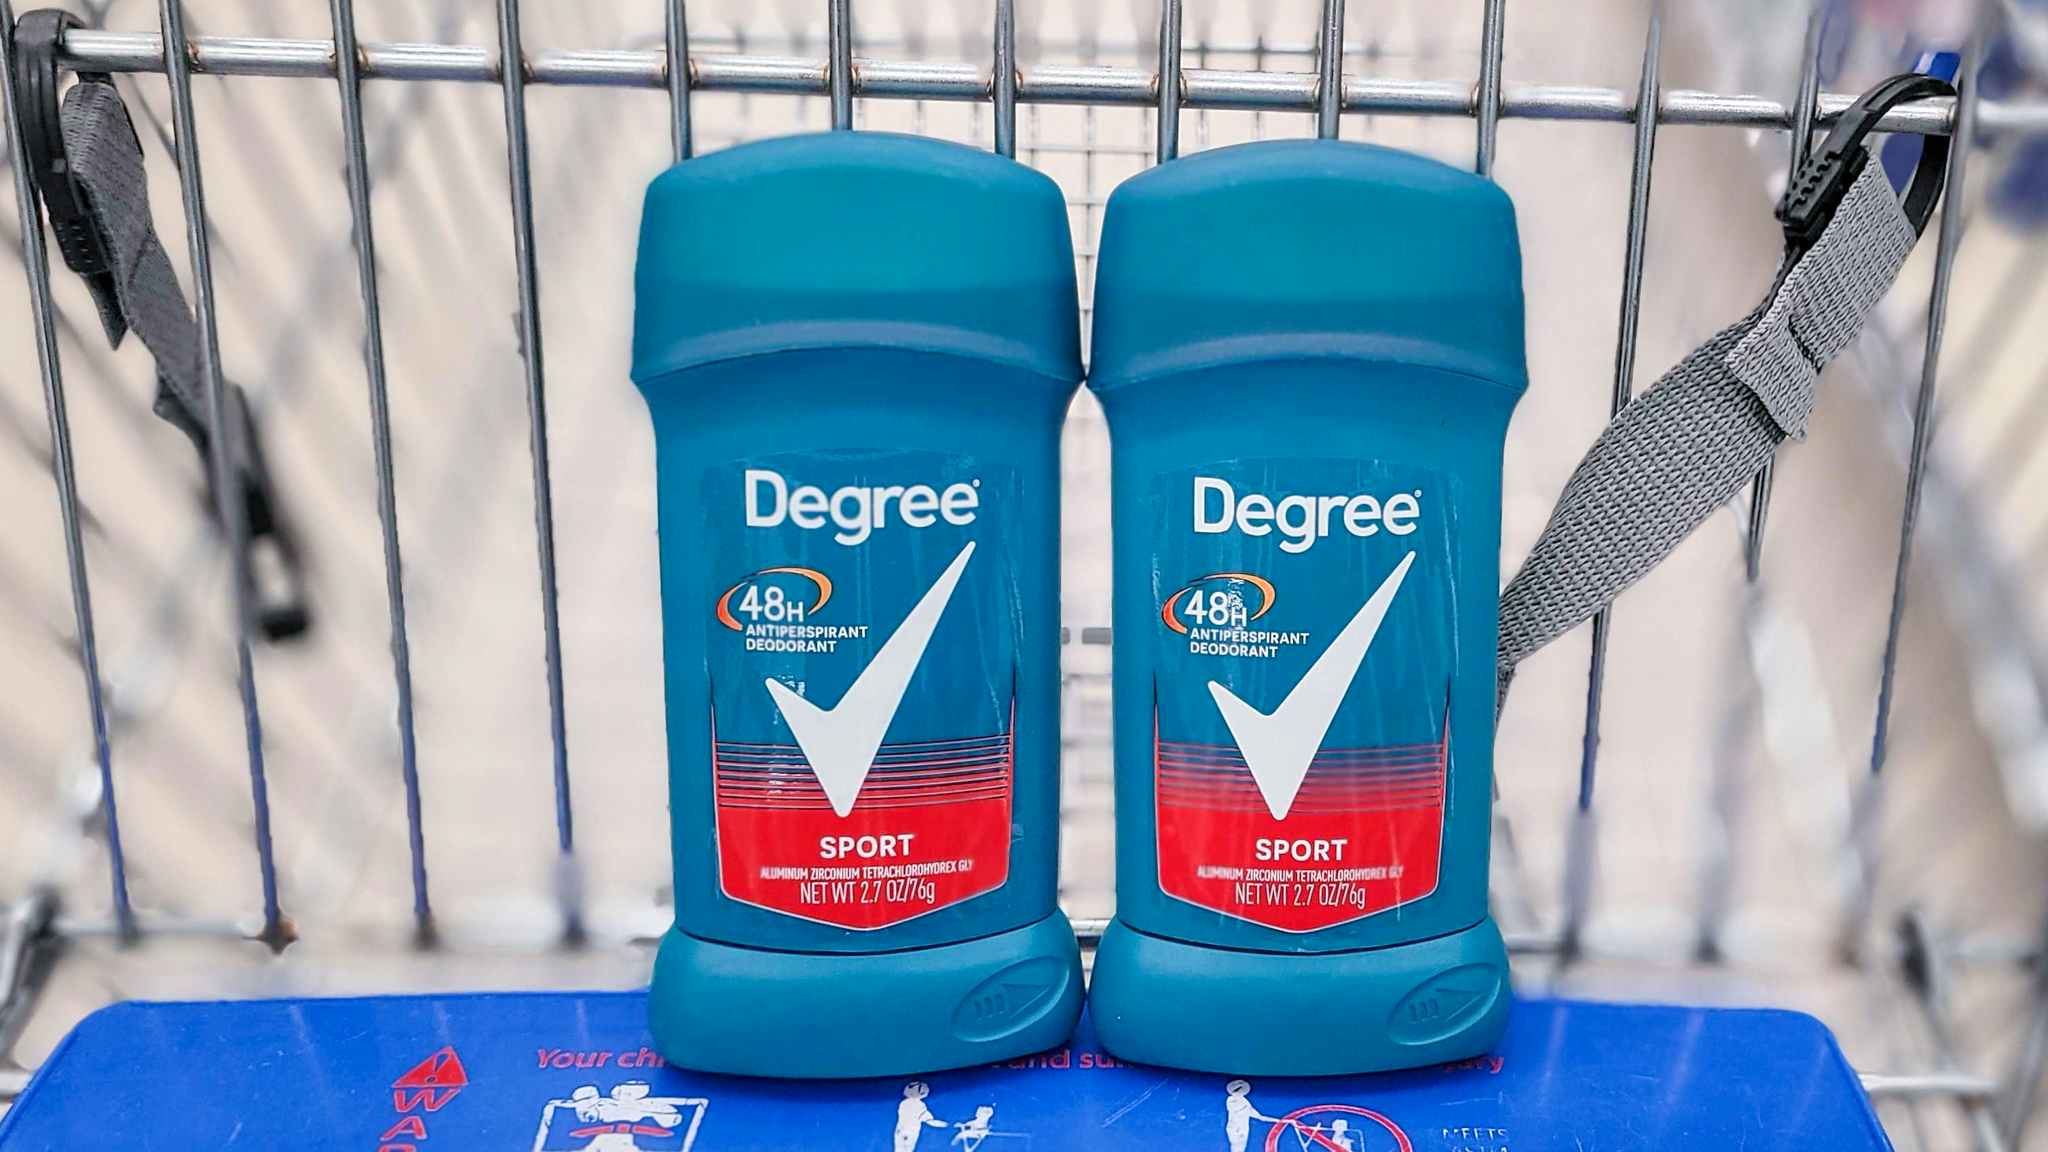 two degree deodorant sticks in shopping cart